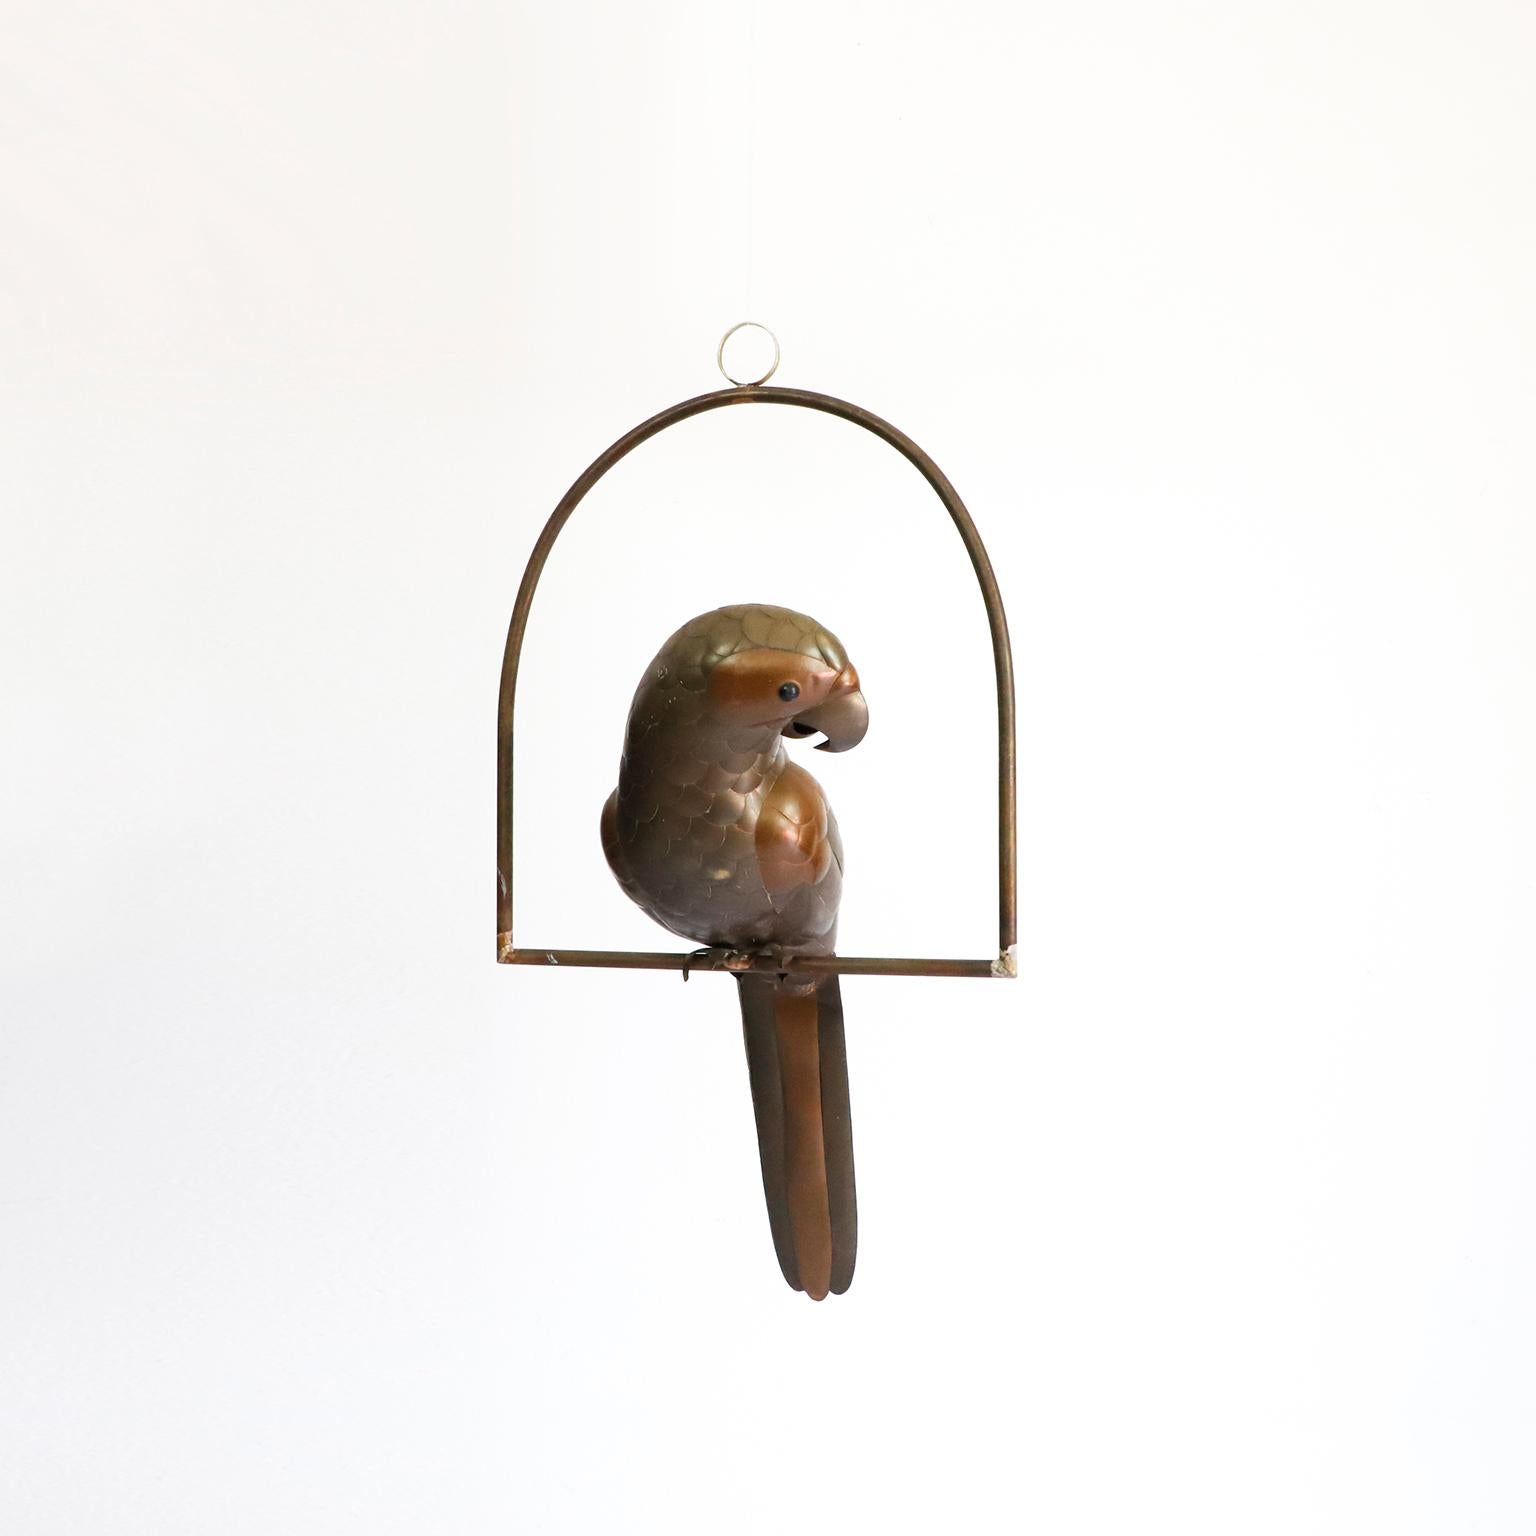 Copper, brass and aluminium Parrot on a hoop hanging stand by Sergio Bustamante, circa 1960.

Sergio Bustamante is a Mexican Artist and sculptor. He began with paintings and papier mache figures, inaugurating the first exhibit of his works at the